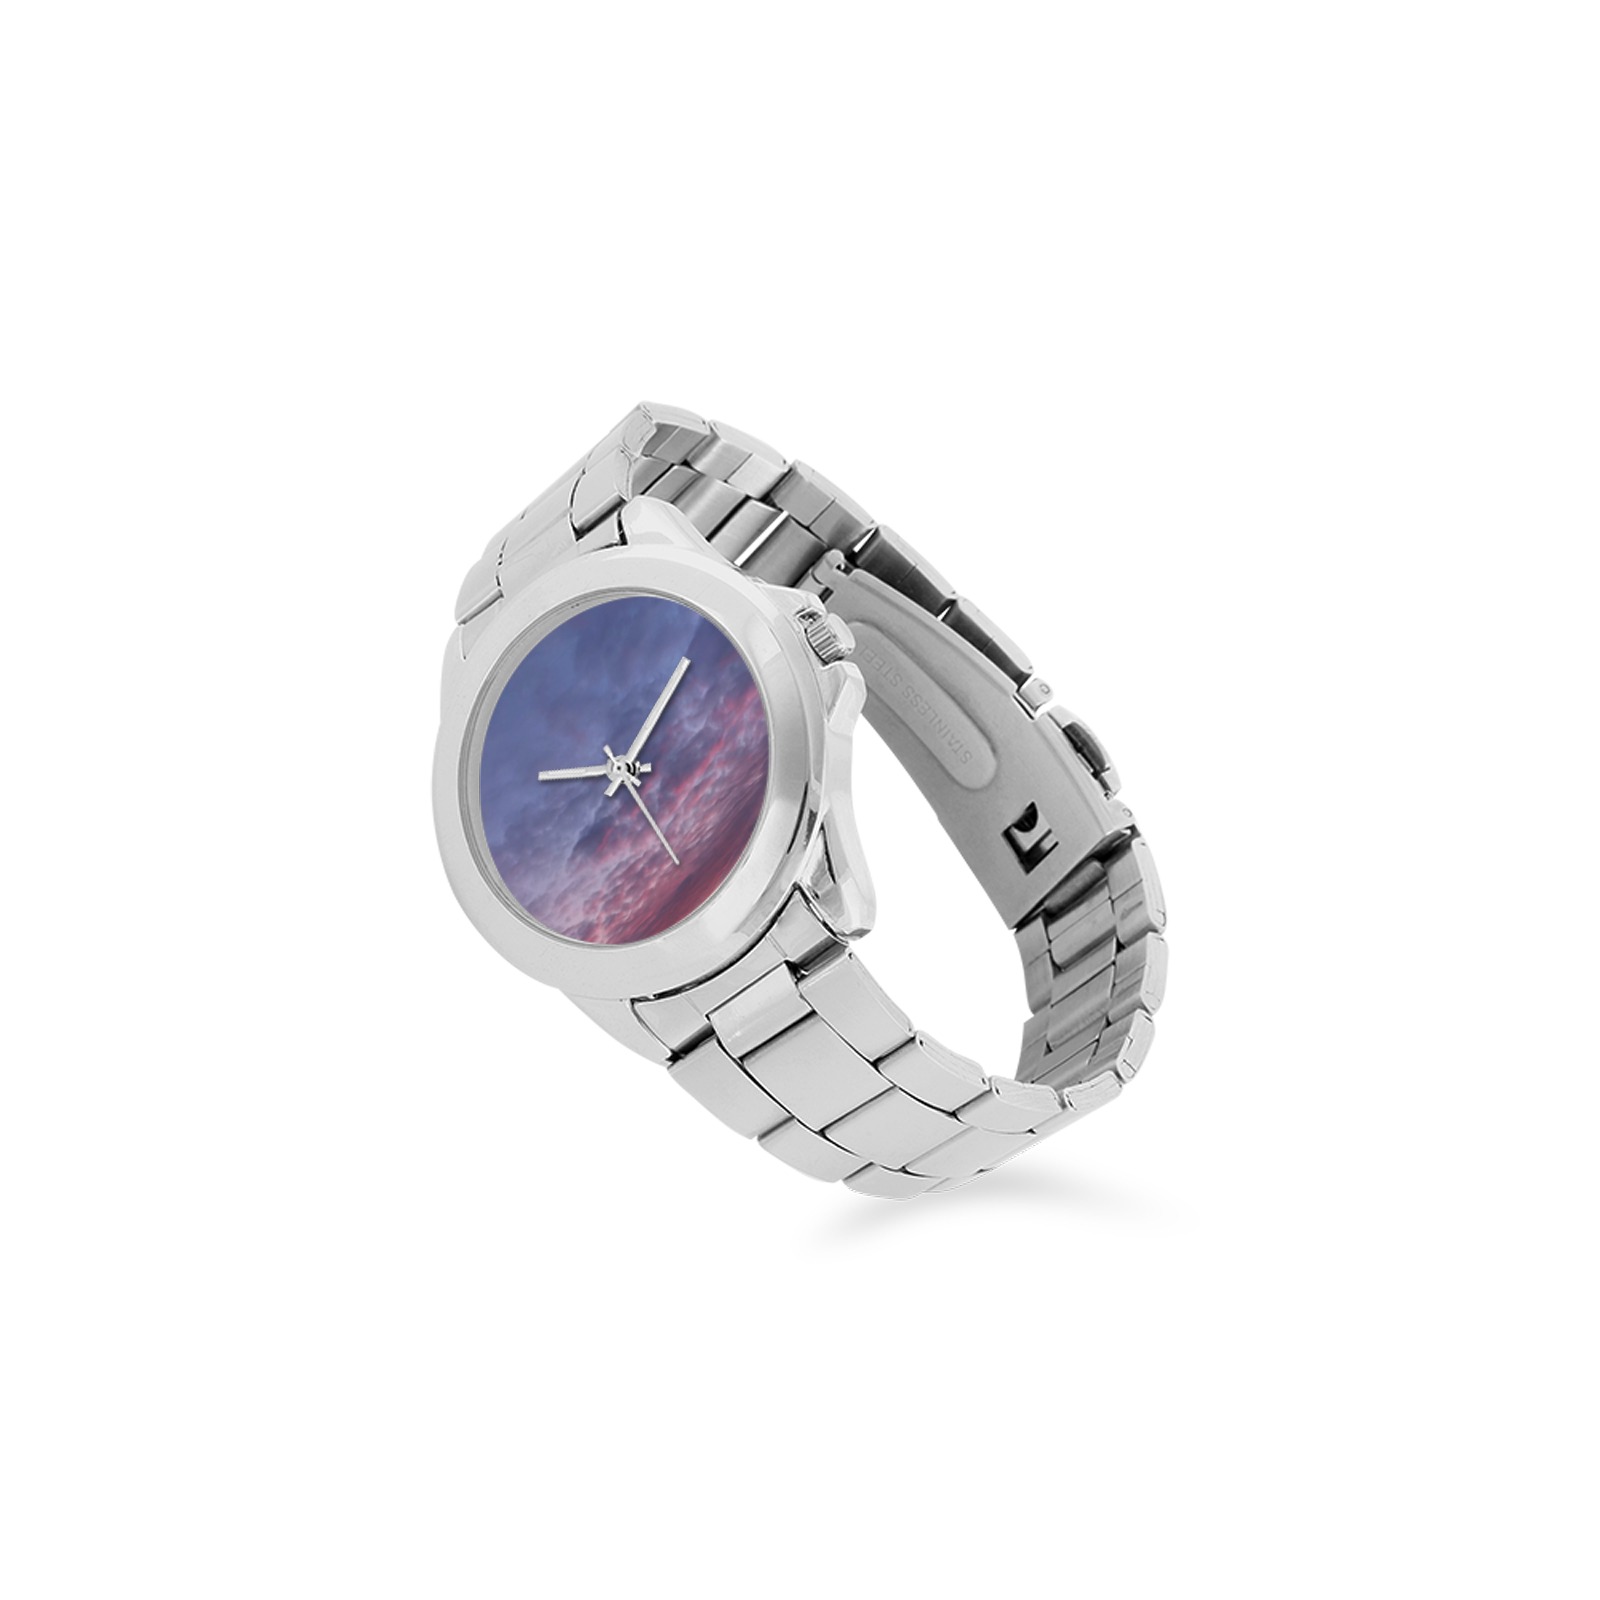 Morning Purple Sunrise Collection Unisex Stainless Steel Watch(Model 103)